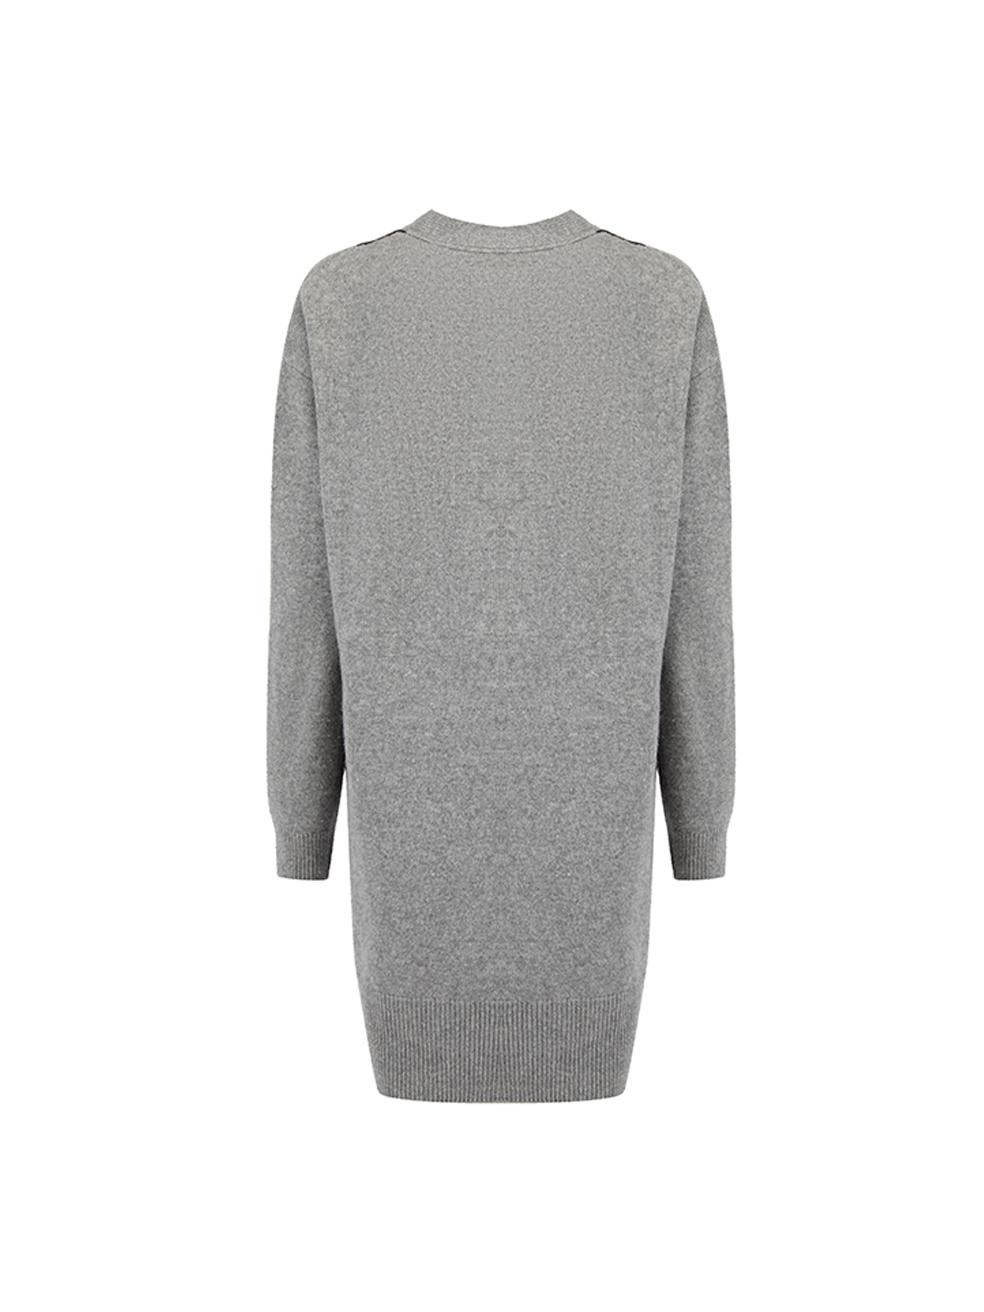 N°21 Women's Grey Lace Trim Cardigan In Excellent Condition For Sale In London, GB